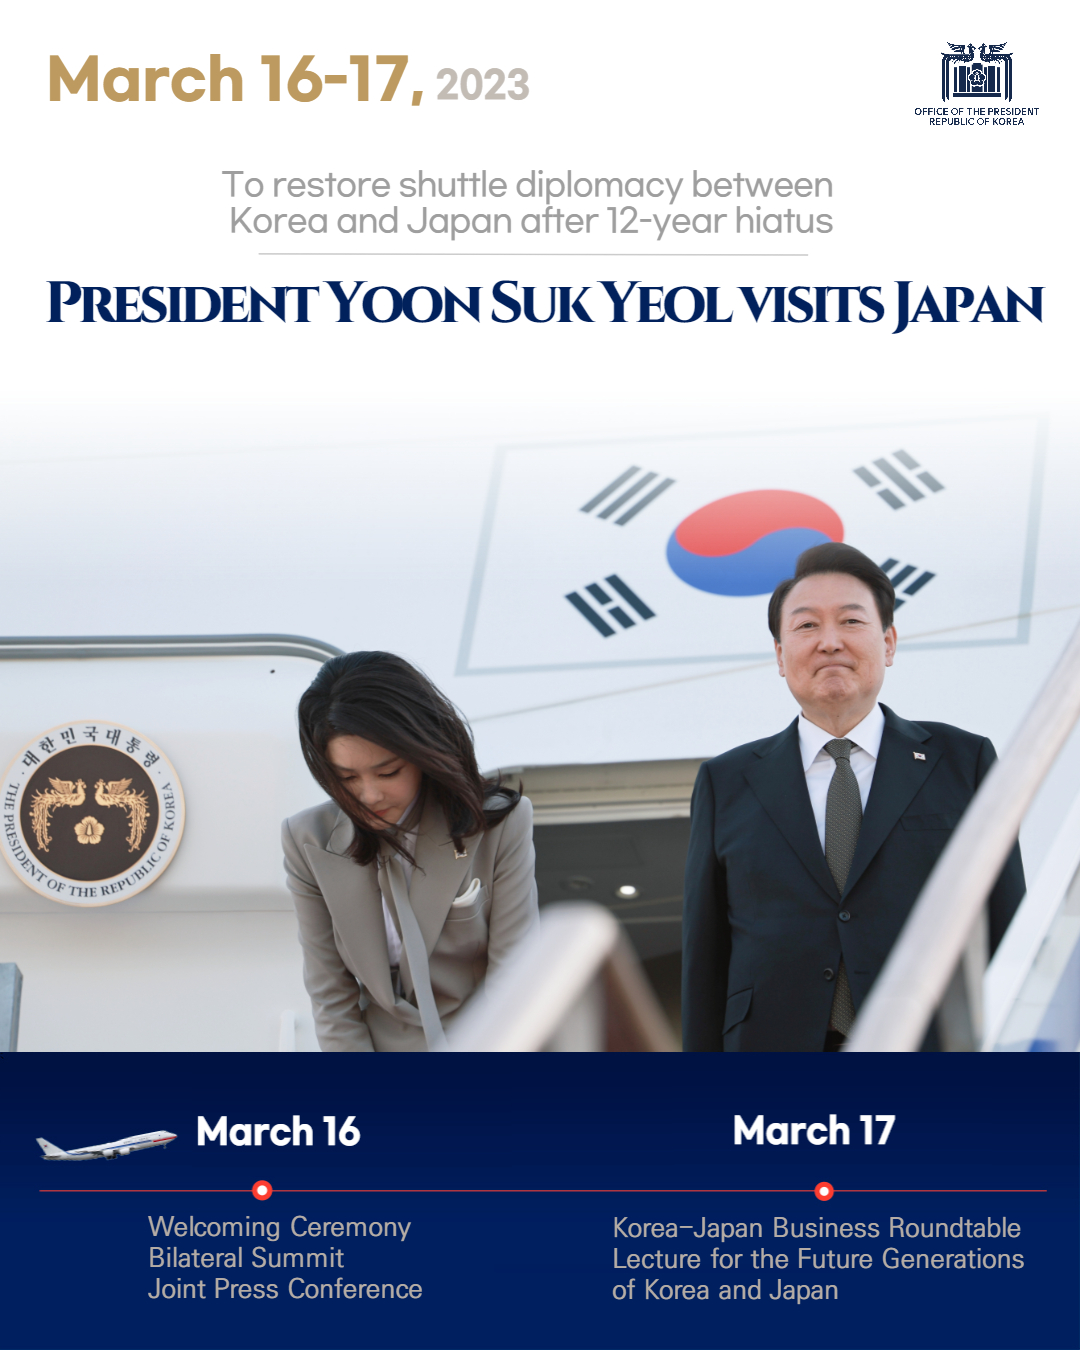 President Yoon Suk Yeol’s Visit to Restore Shuttle Diplomacy with Japan after 12-Year Hiatus slide 1